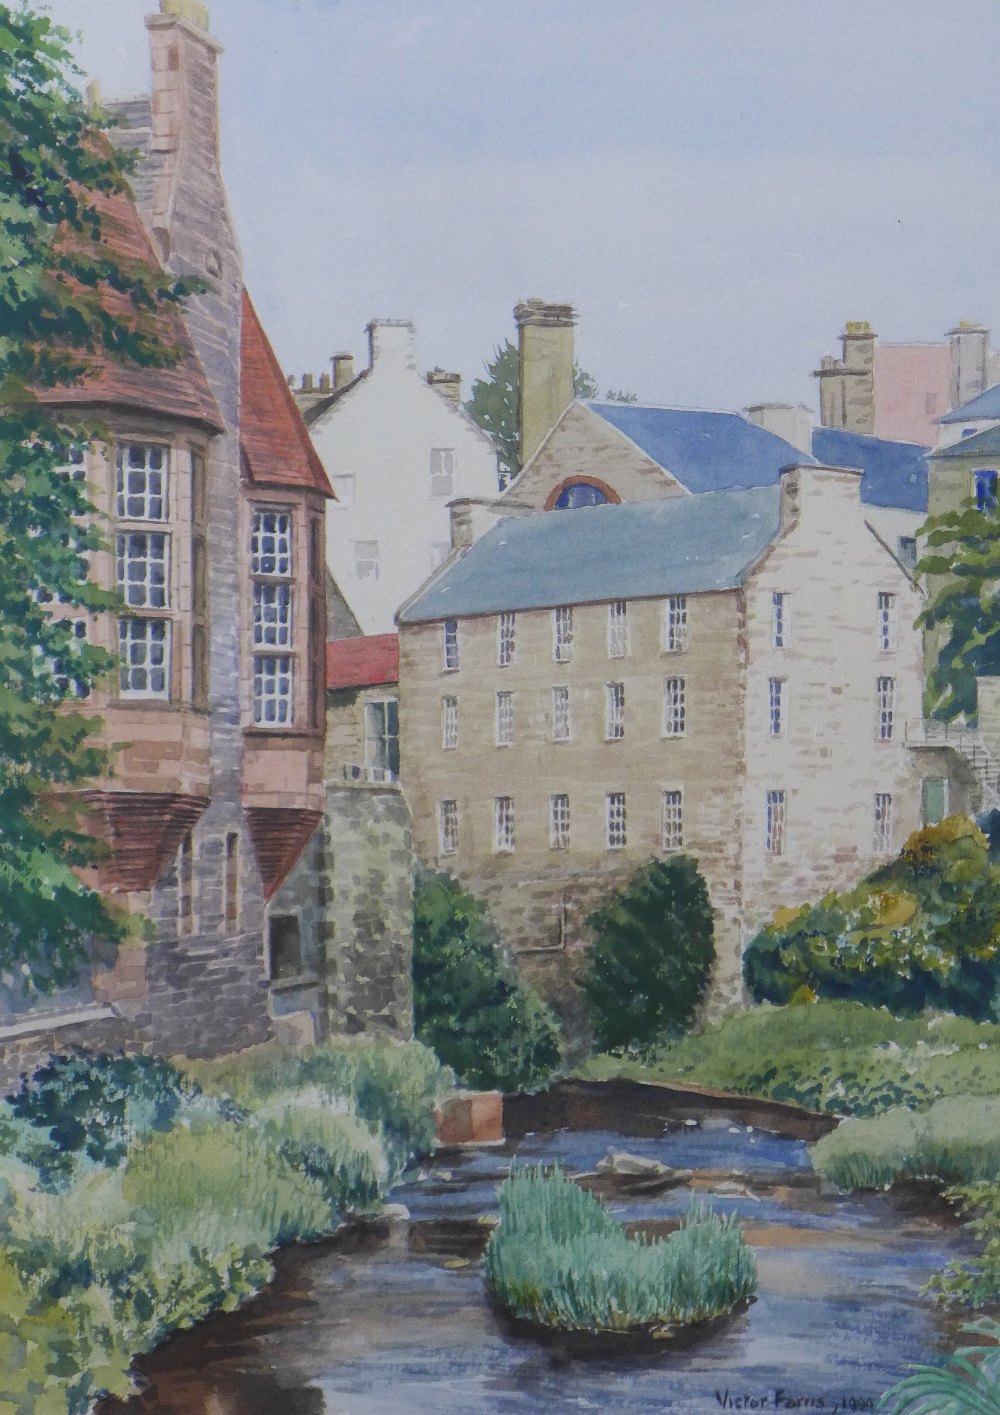 Victor Farris, watercolour of The Dean Village, Edinburgh, signed and dated 1994, framed under glas